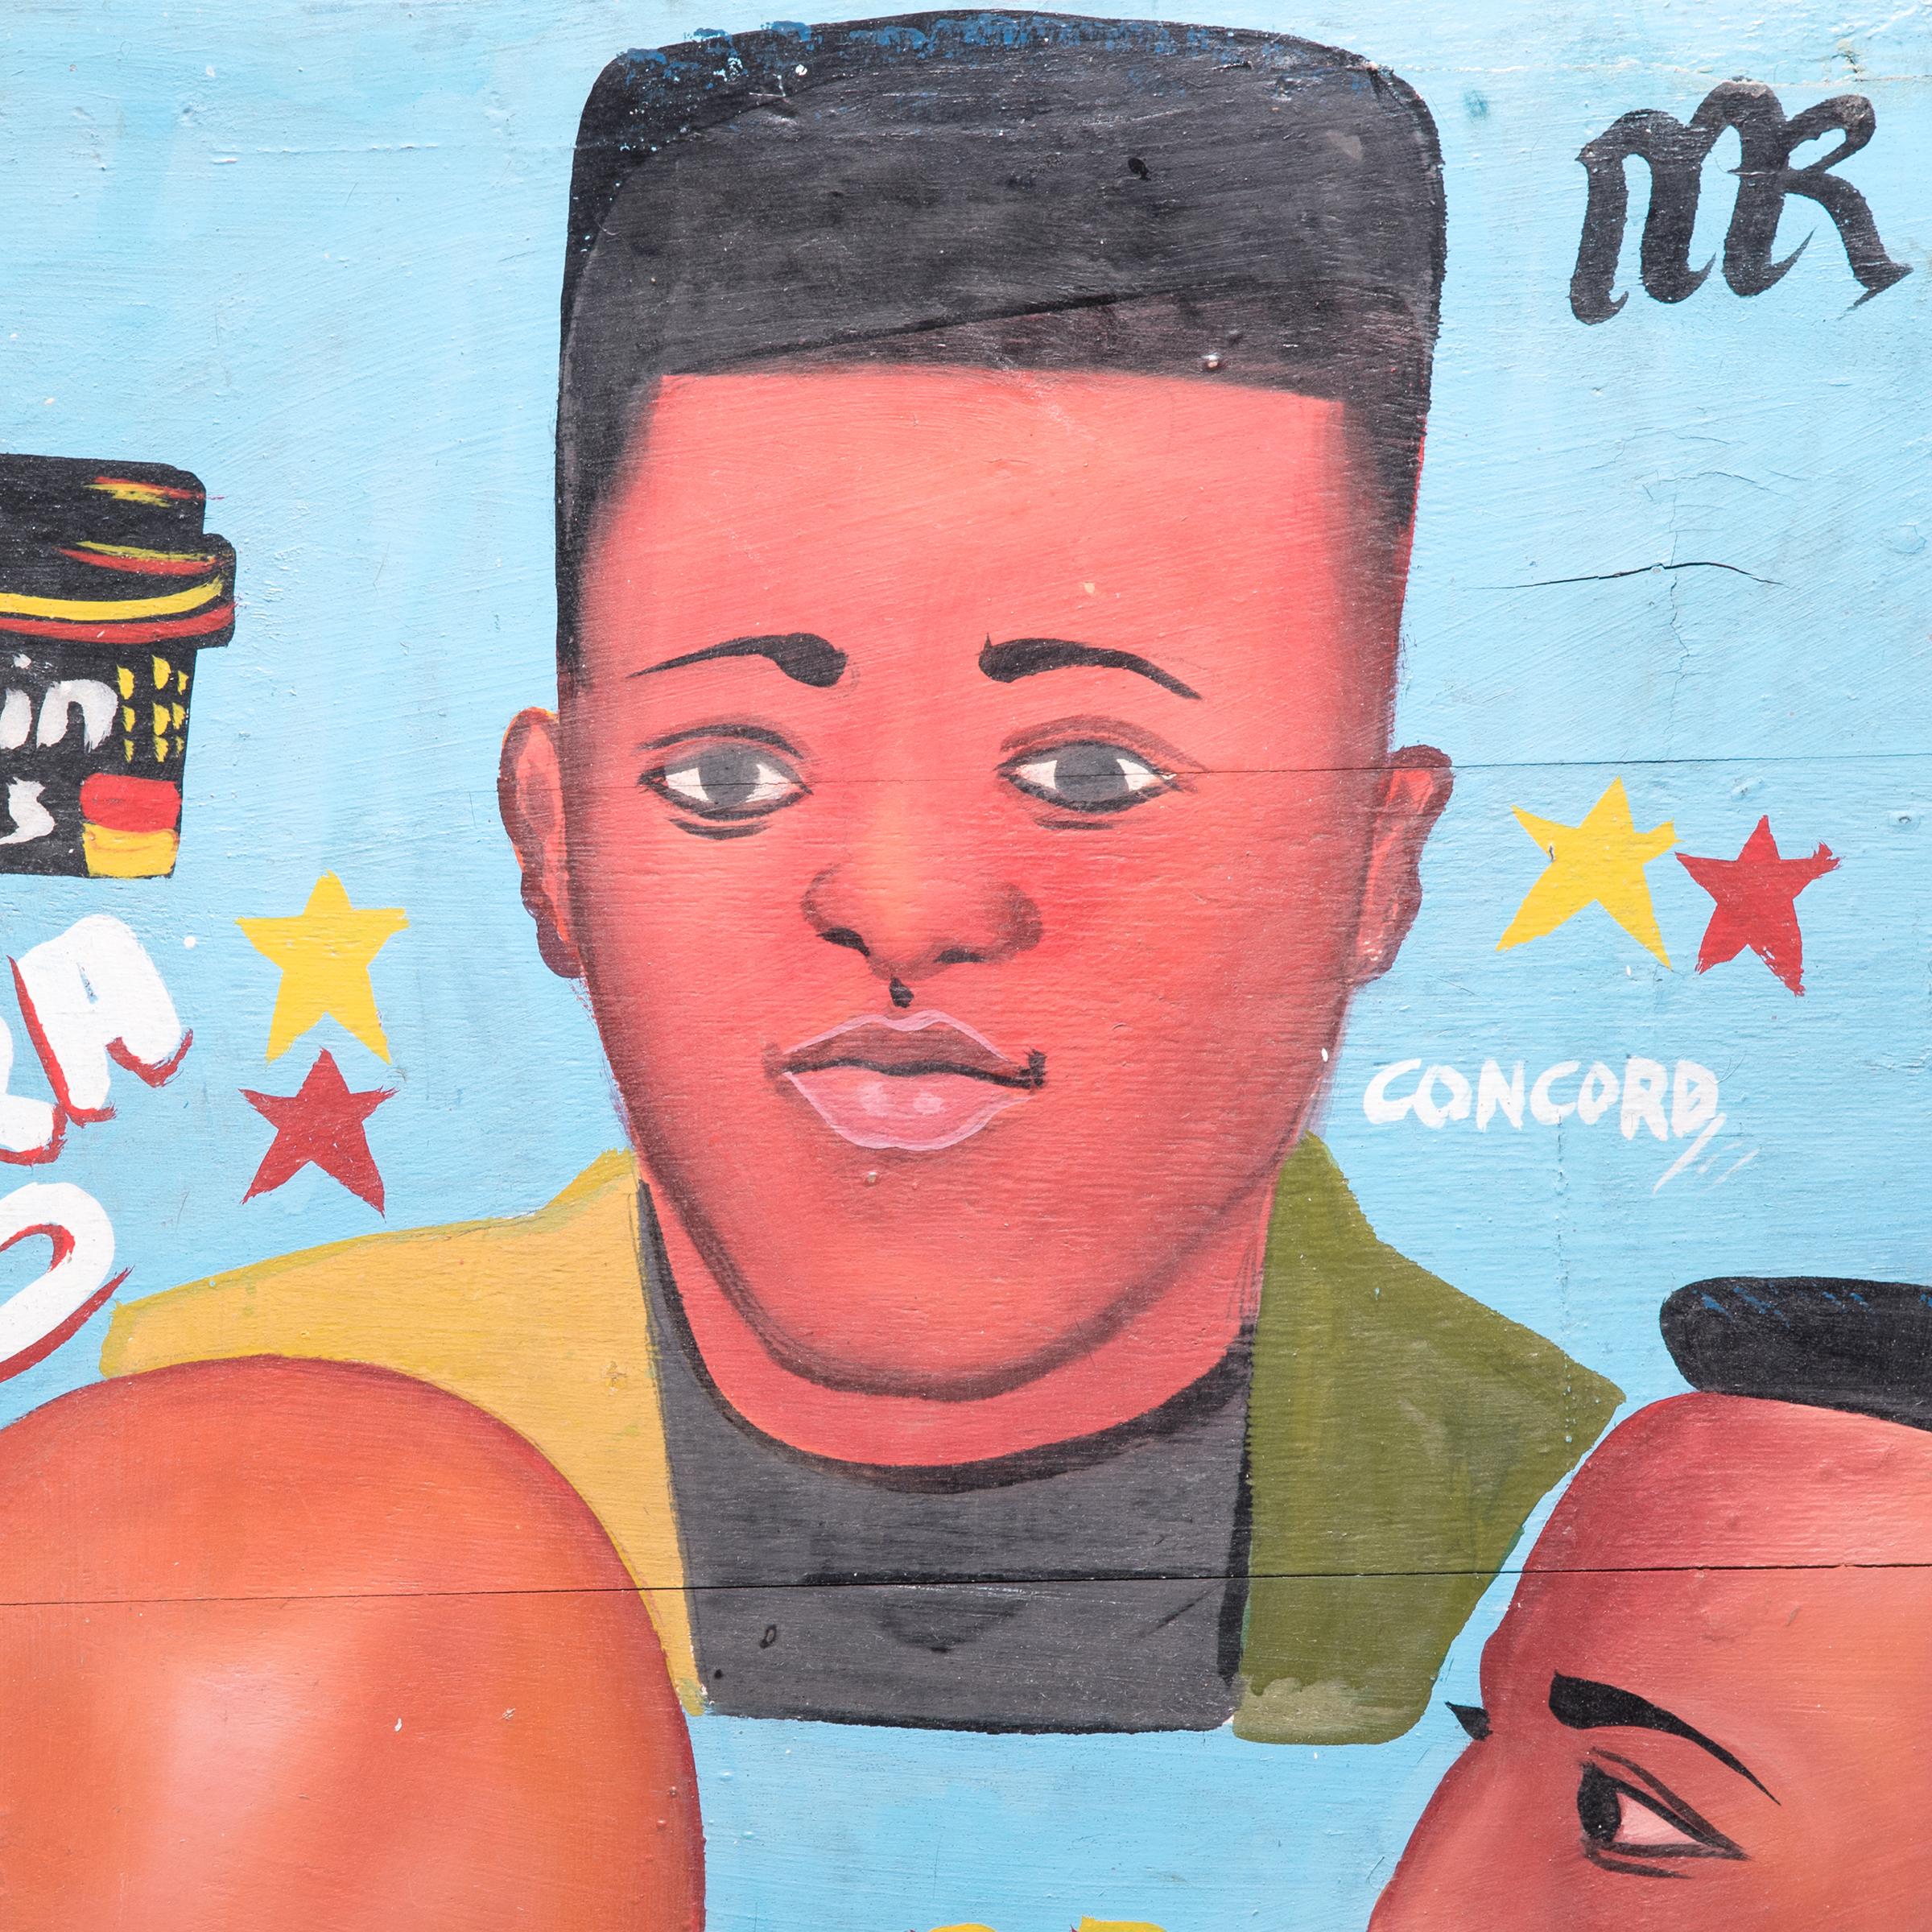 Swinging from trees or mounted to buildings, barbershop signs are fascinating examples of pop and Folk Art in Africa. Each sign takes on the unique personality of its owner, expressing both their hairdressing options, and the promises that come with